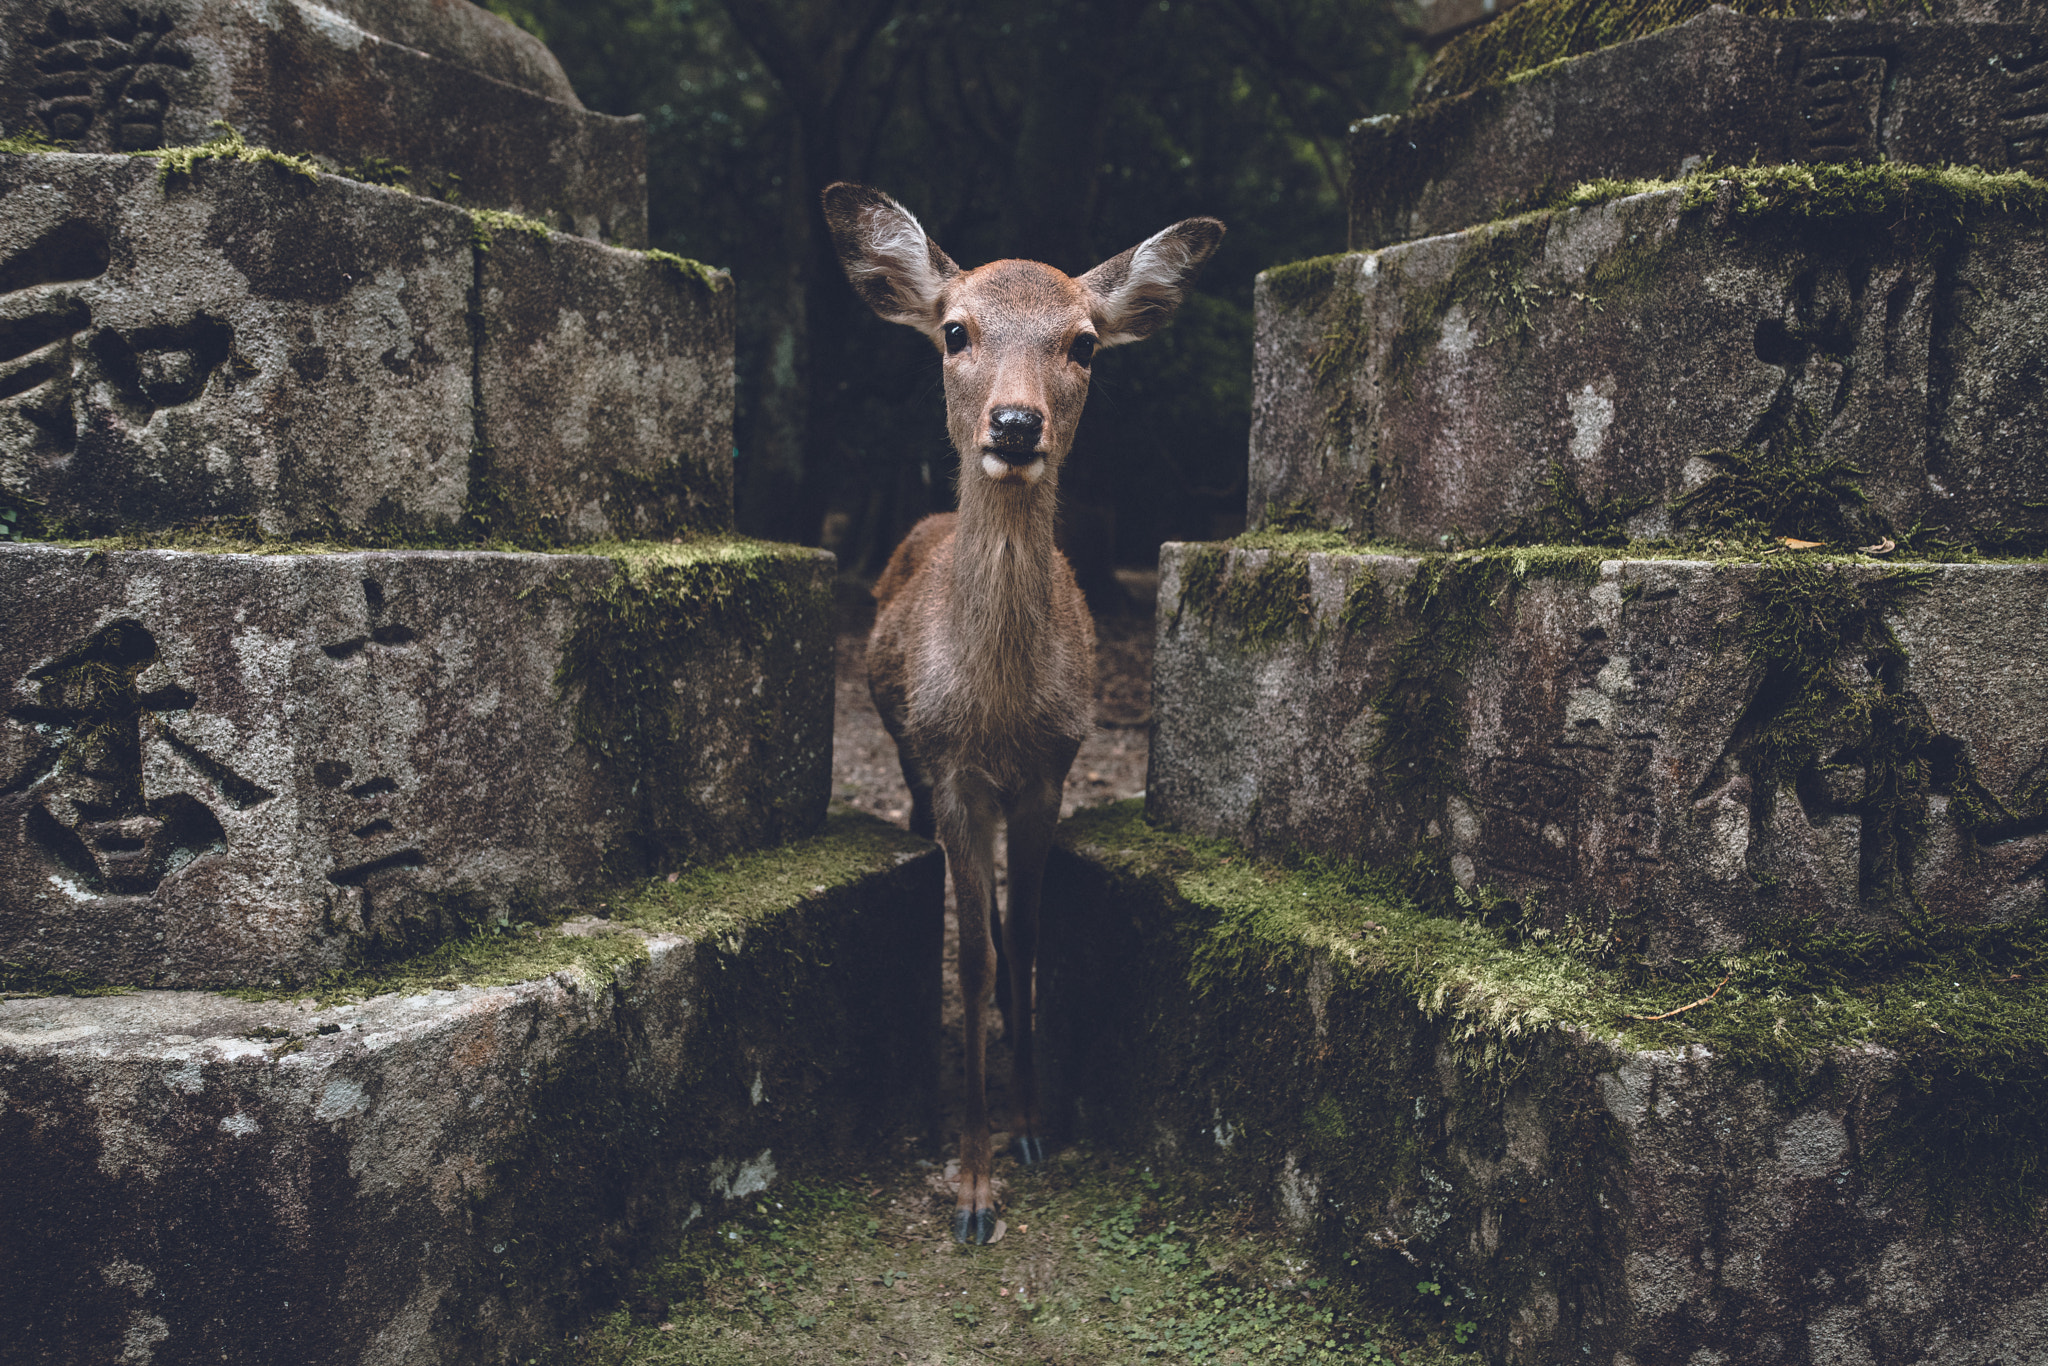 Sony a7R II + Sigma 24mm F1.4 DG HSM Art sample photo. Not pictured, the deer trying to eat my camera photography